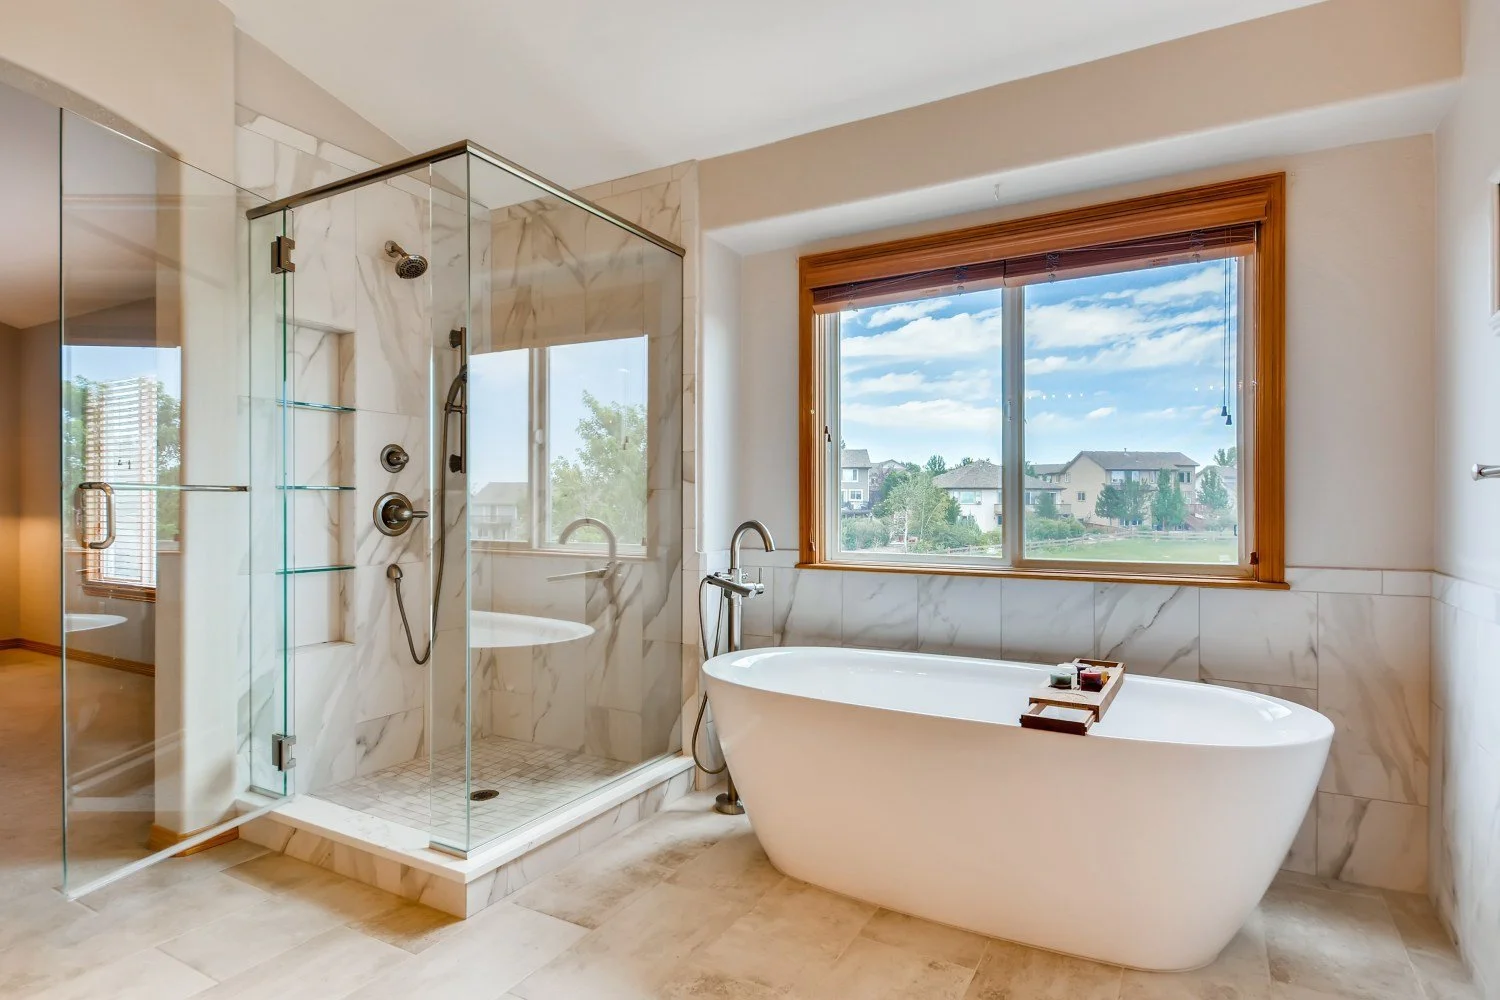 What to Consider When Designing a Bathroom Remodel